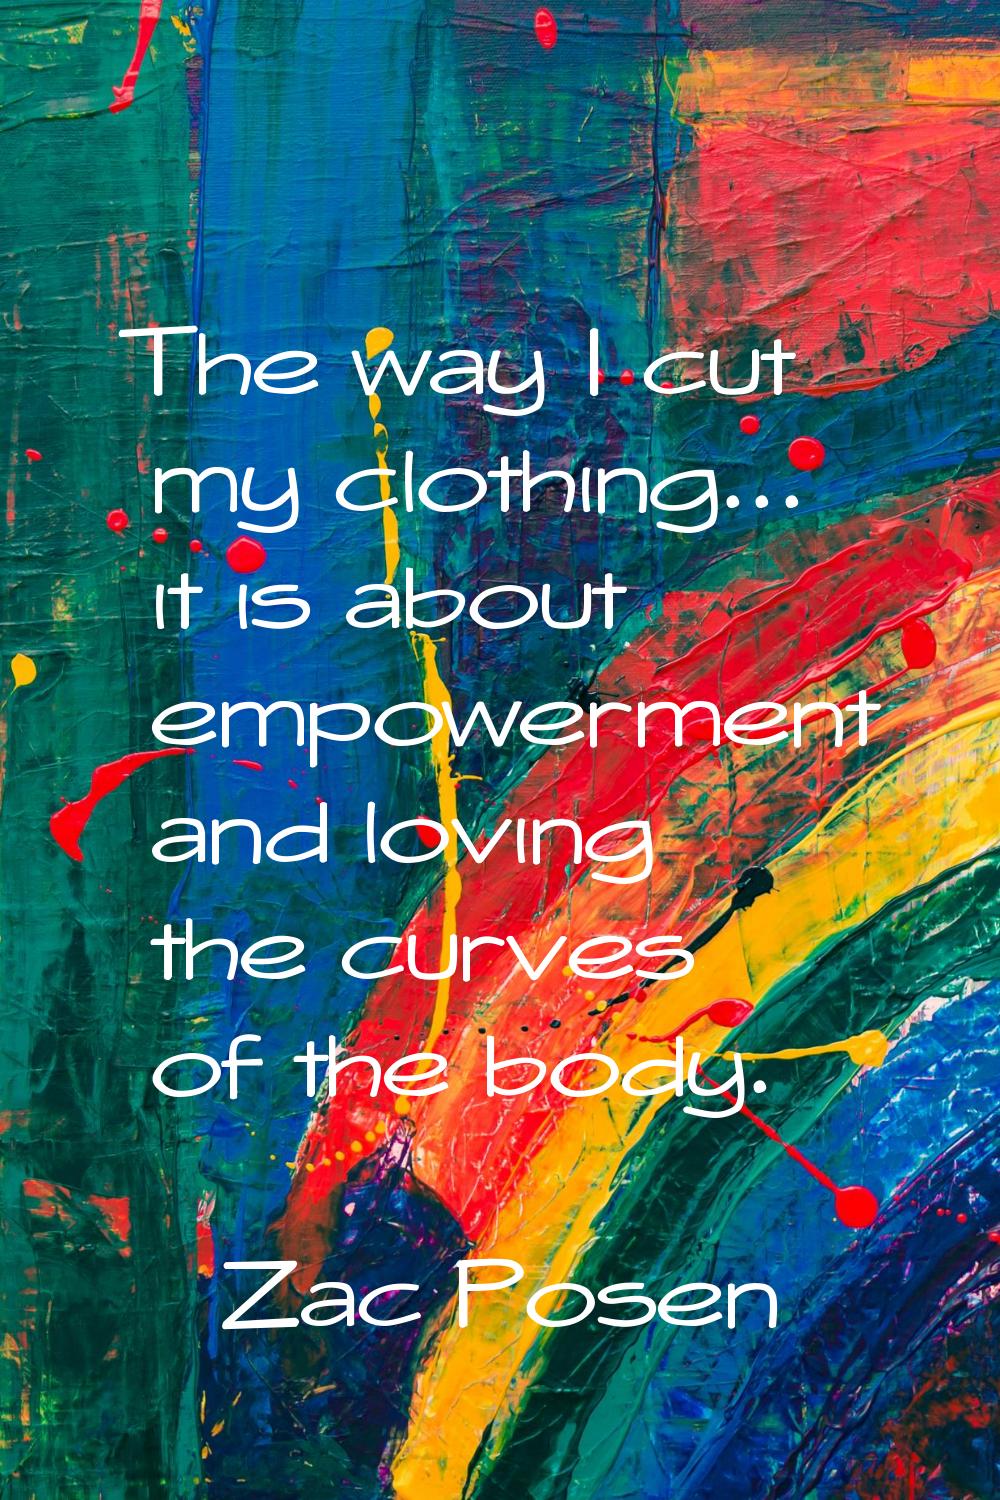 The way I cut my clothing... it is about empowerment and loving the curves of the body.